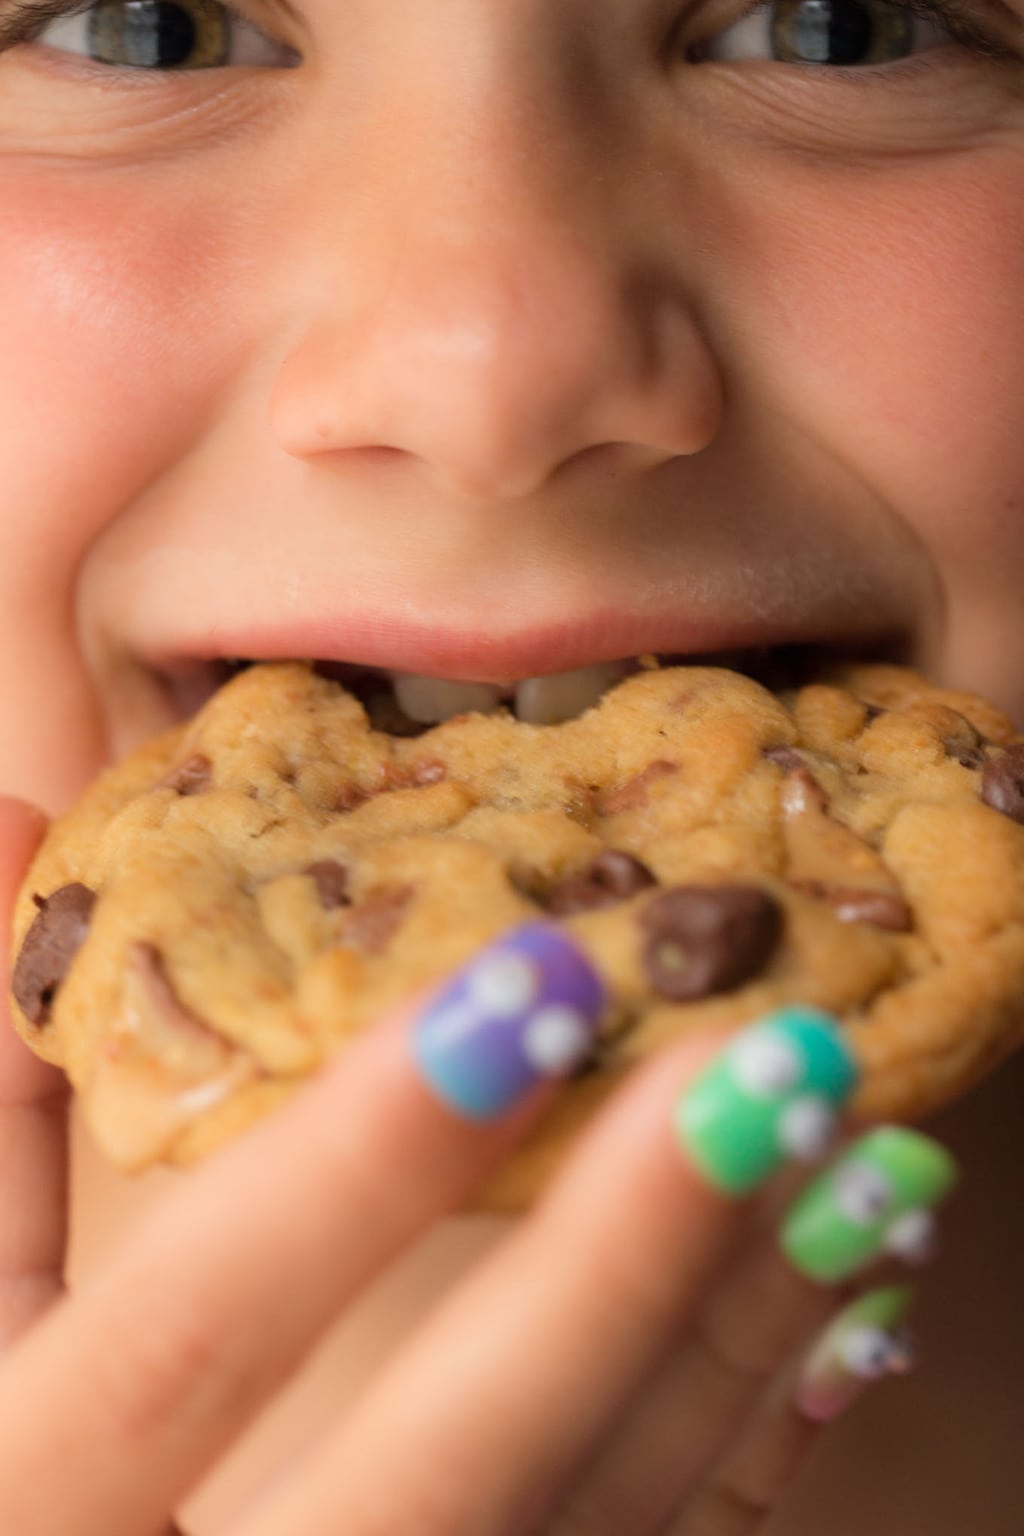 A super closeup of a young girl's face biting into a One Bowl Toffee Bar Chocolate Chip Cookie